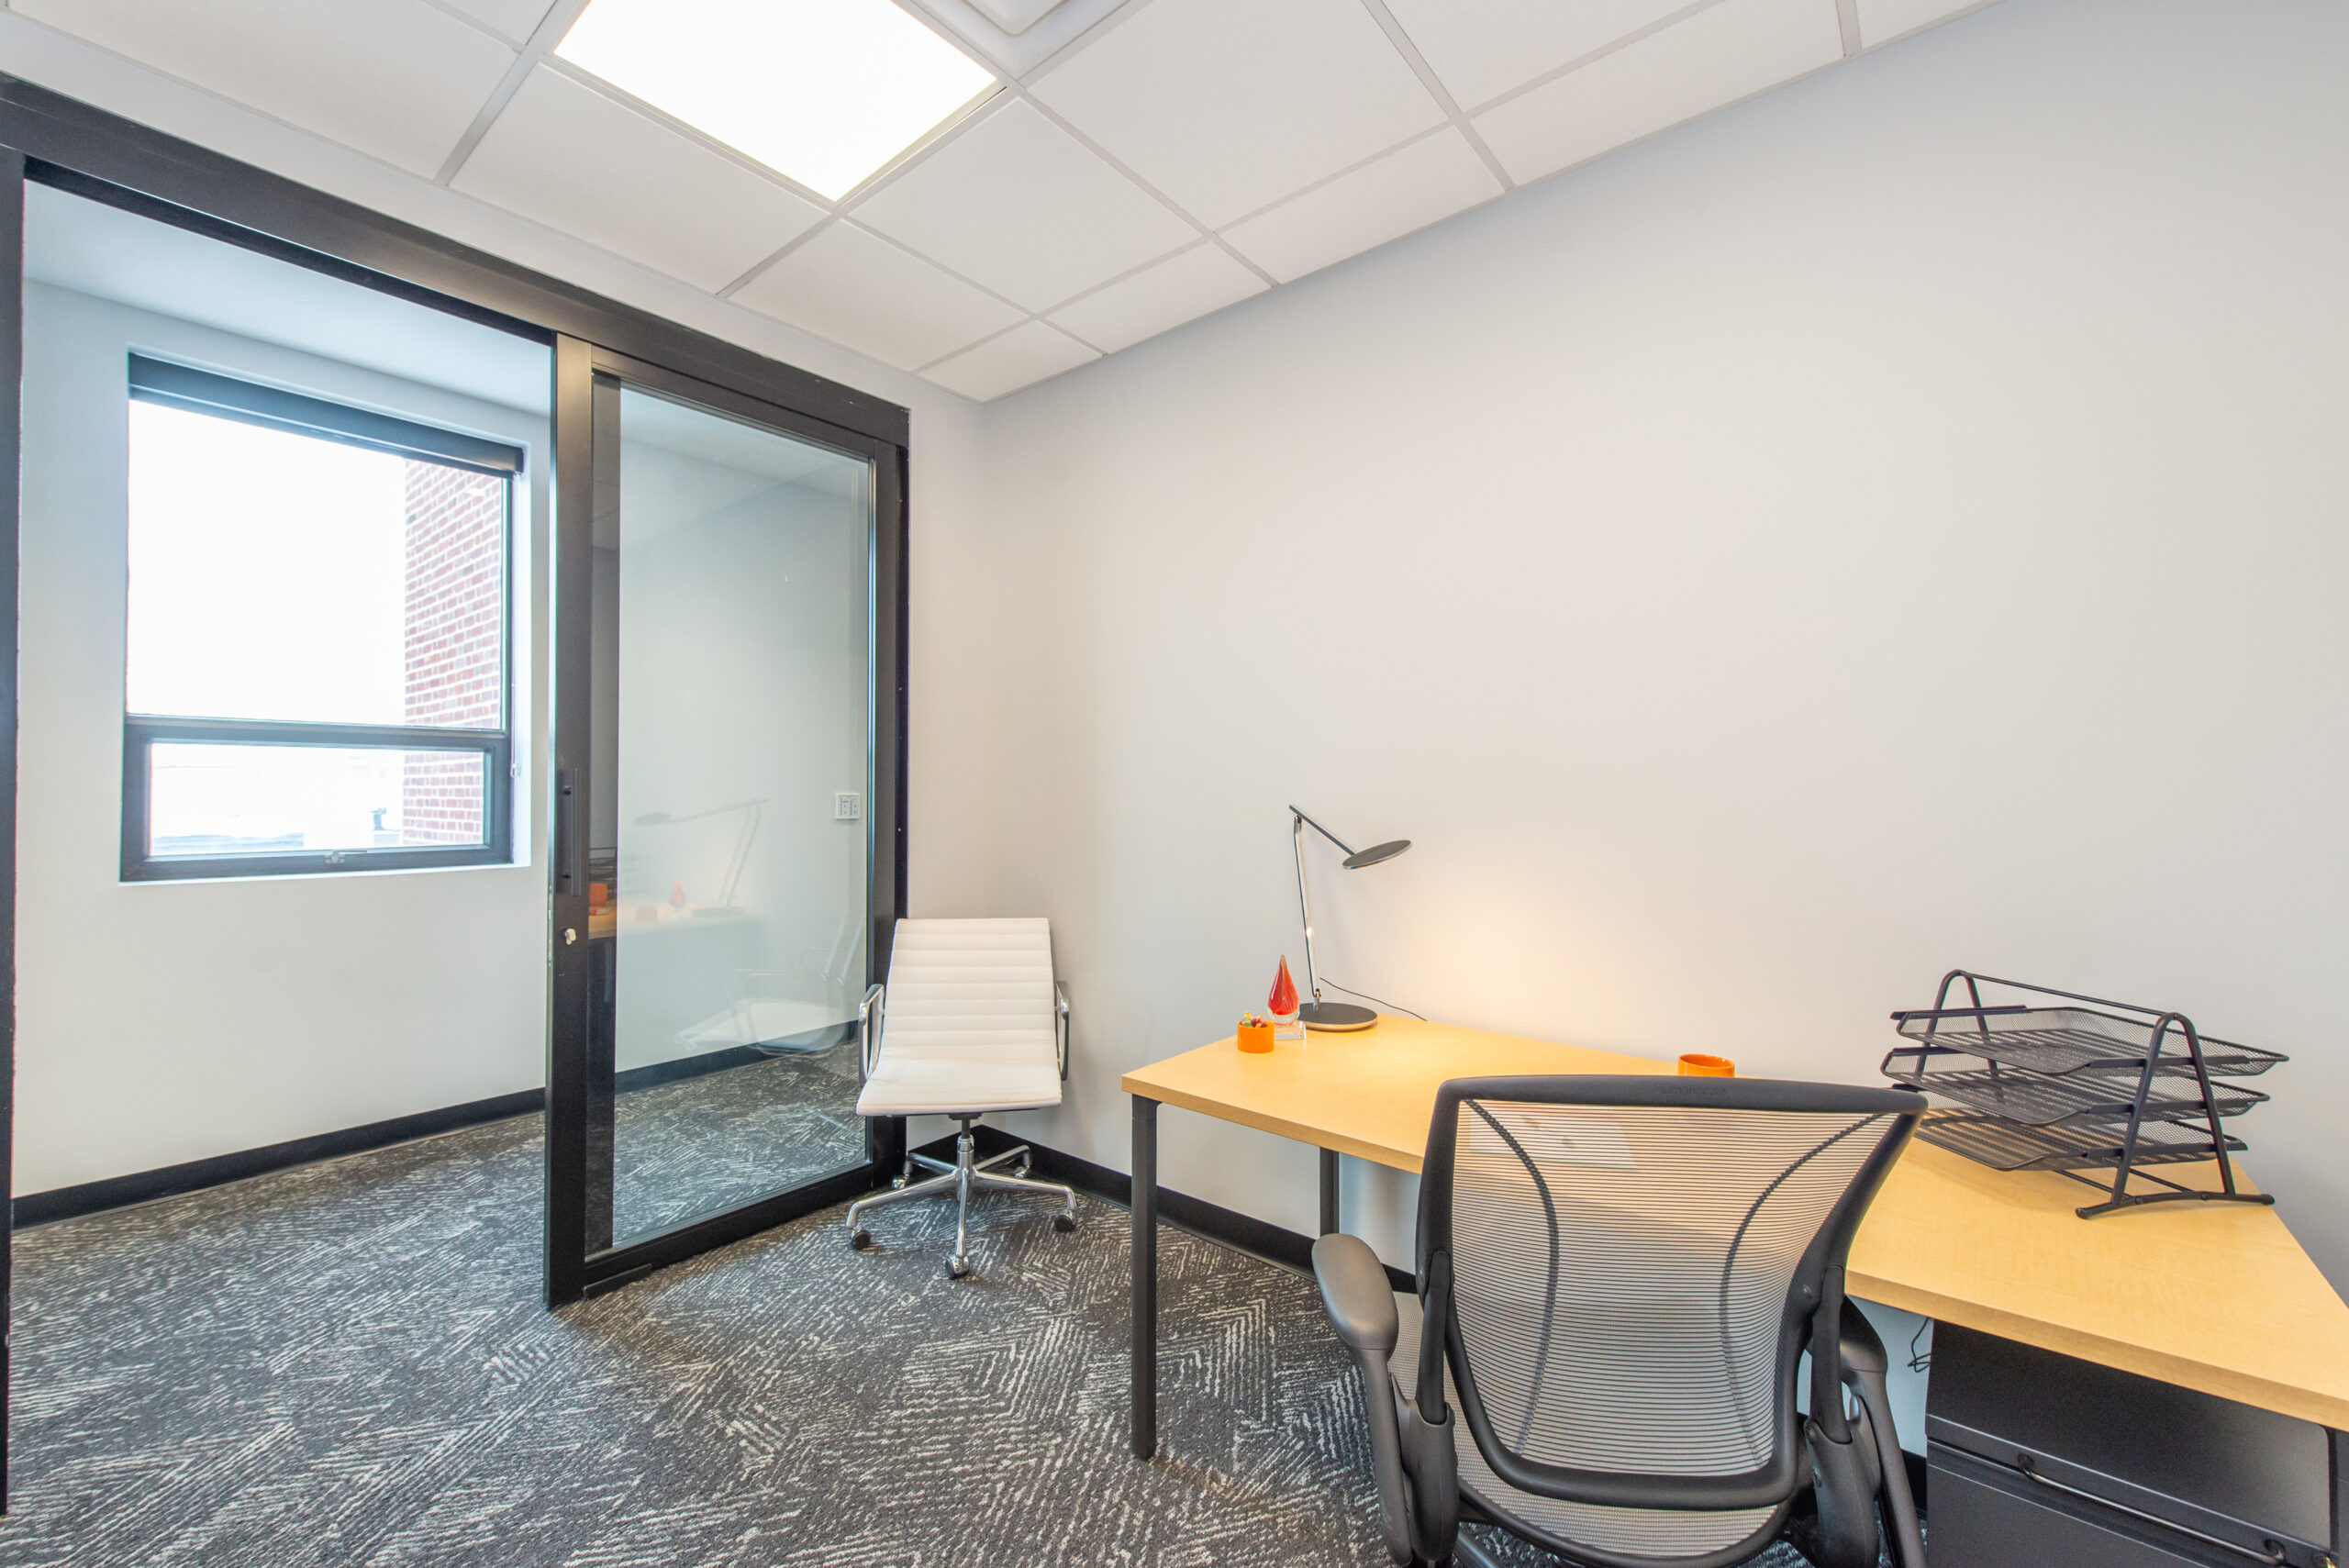 OE Summit private office